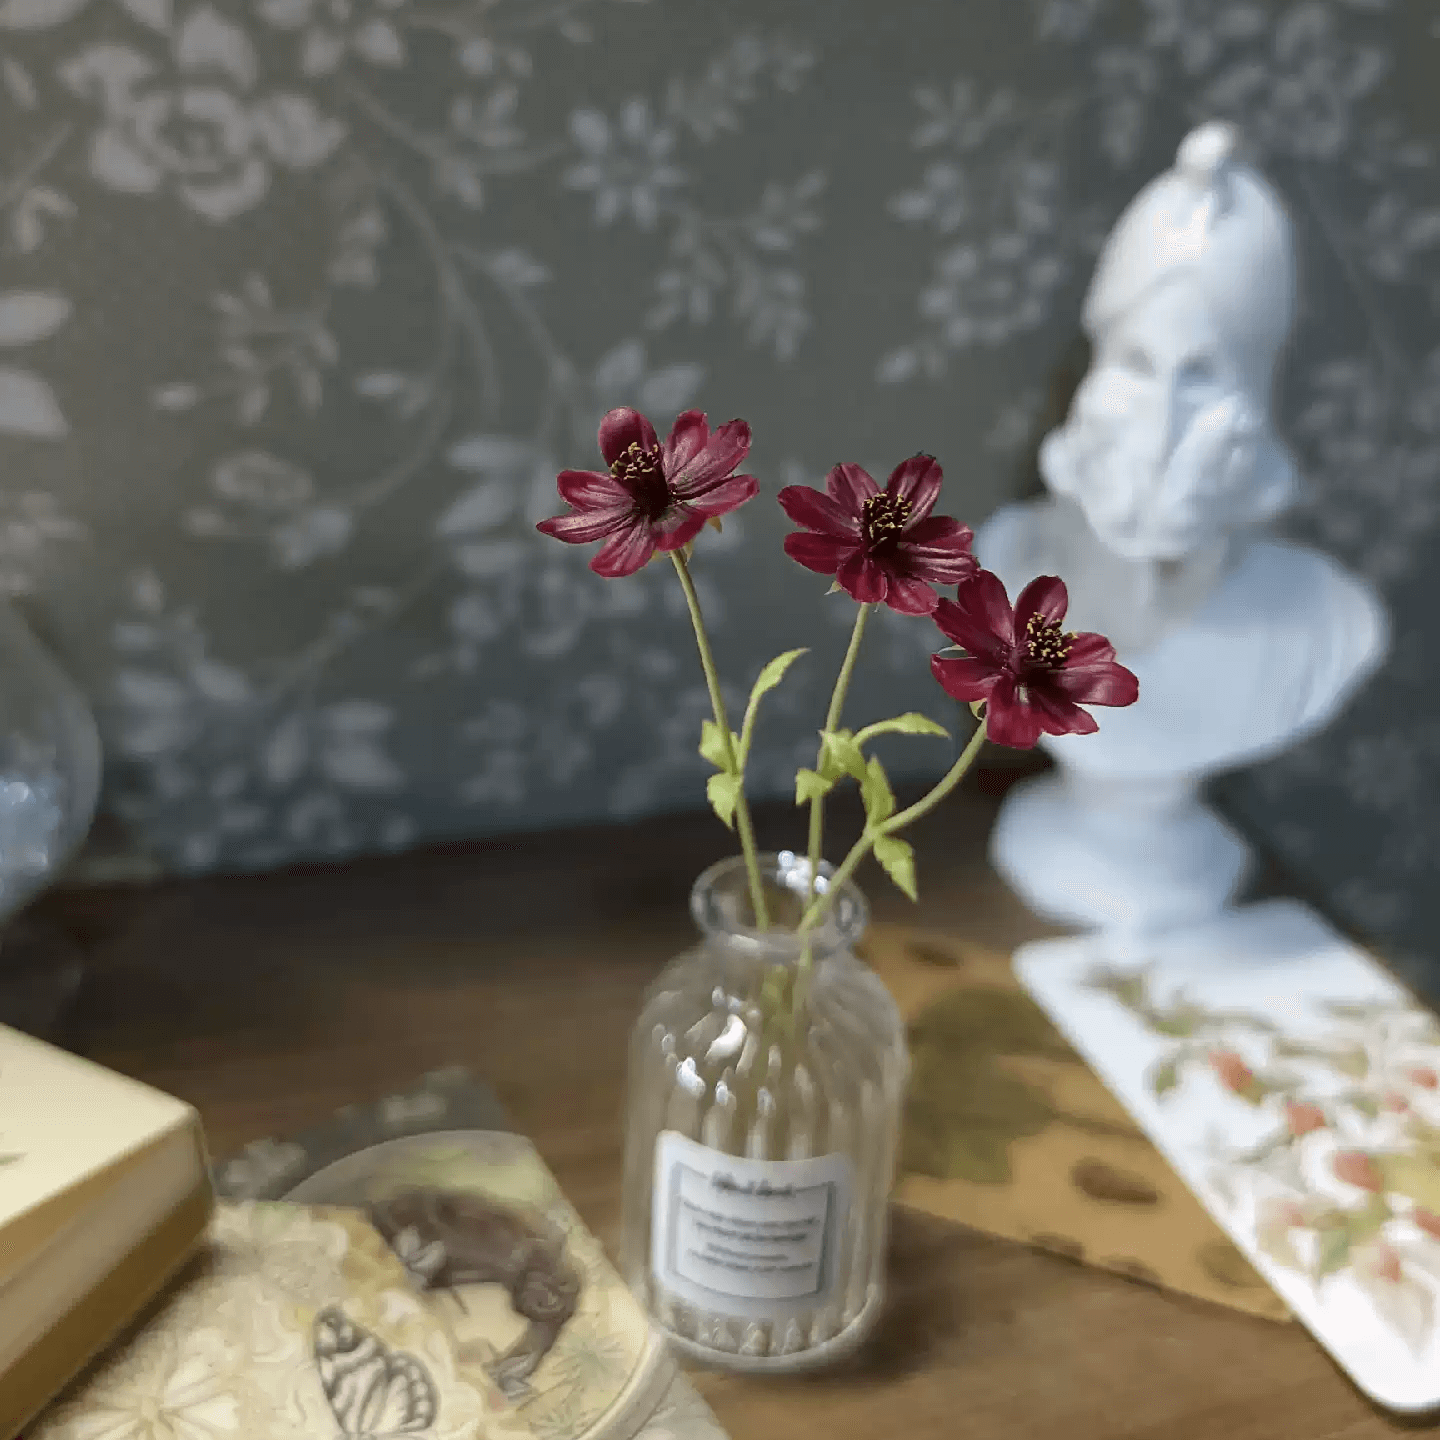 Chocolate cosmos (Cosmos atrosanguineus) have velvety, dark red flowers on wiry black stems and an unusual chocolatey fragrance. Miniature for dolls, dollhouses, roomboxes. Suitable for Blythe, Barbie, Paola,and other dolls with a height of 25-40cm (10-15.8 inches). Scale: 1:6; 1:12 Material: Handmade from Clay